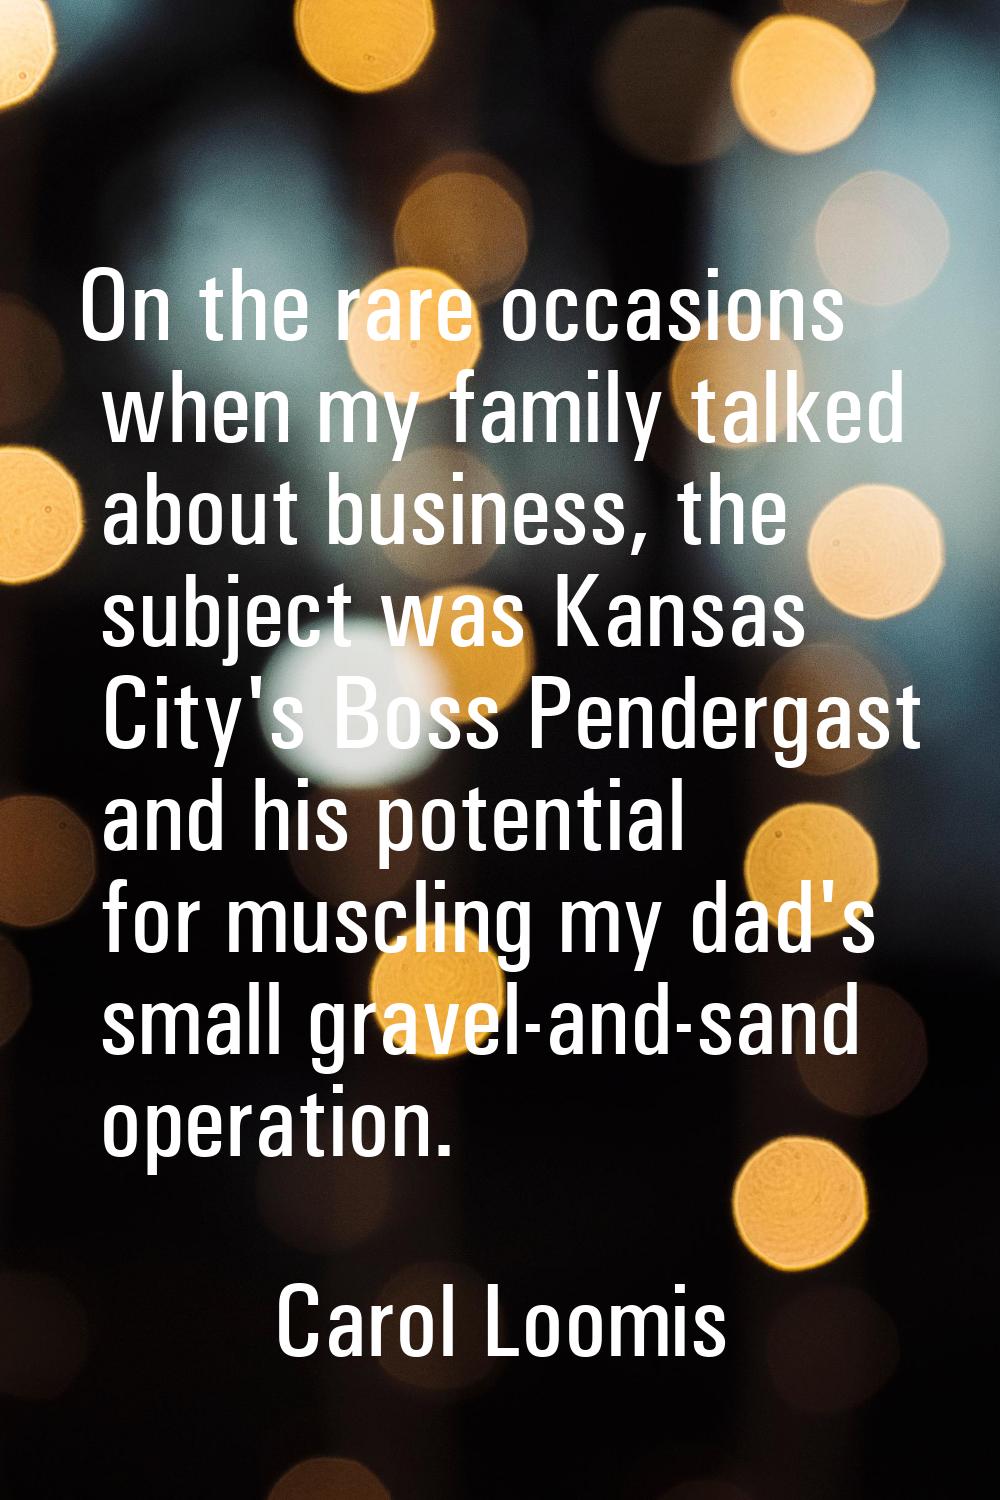 On the rare occasions when my family talked about business, the subject was Kansas City's Boss Pend